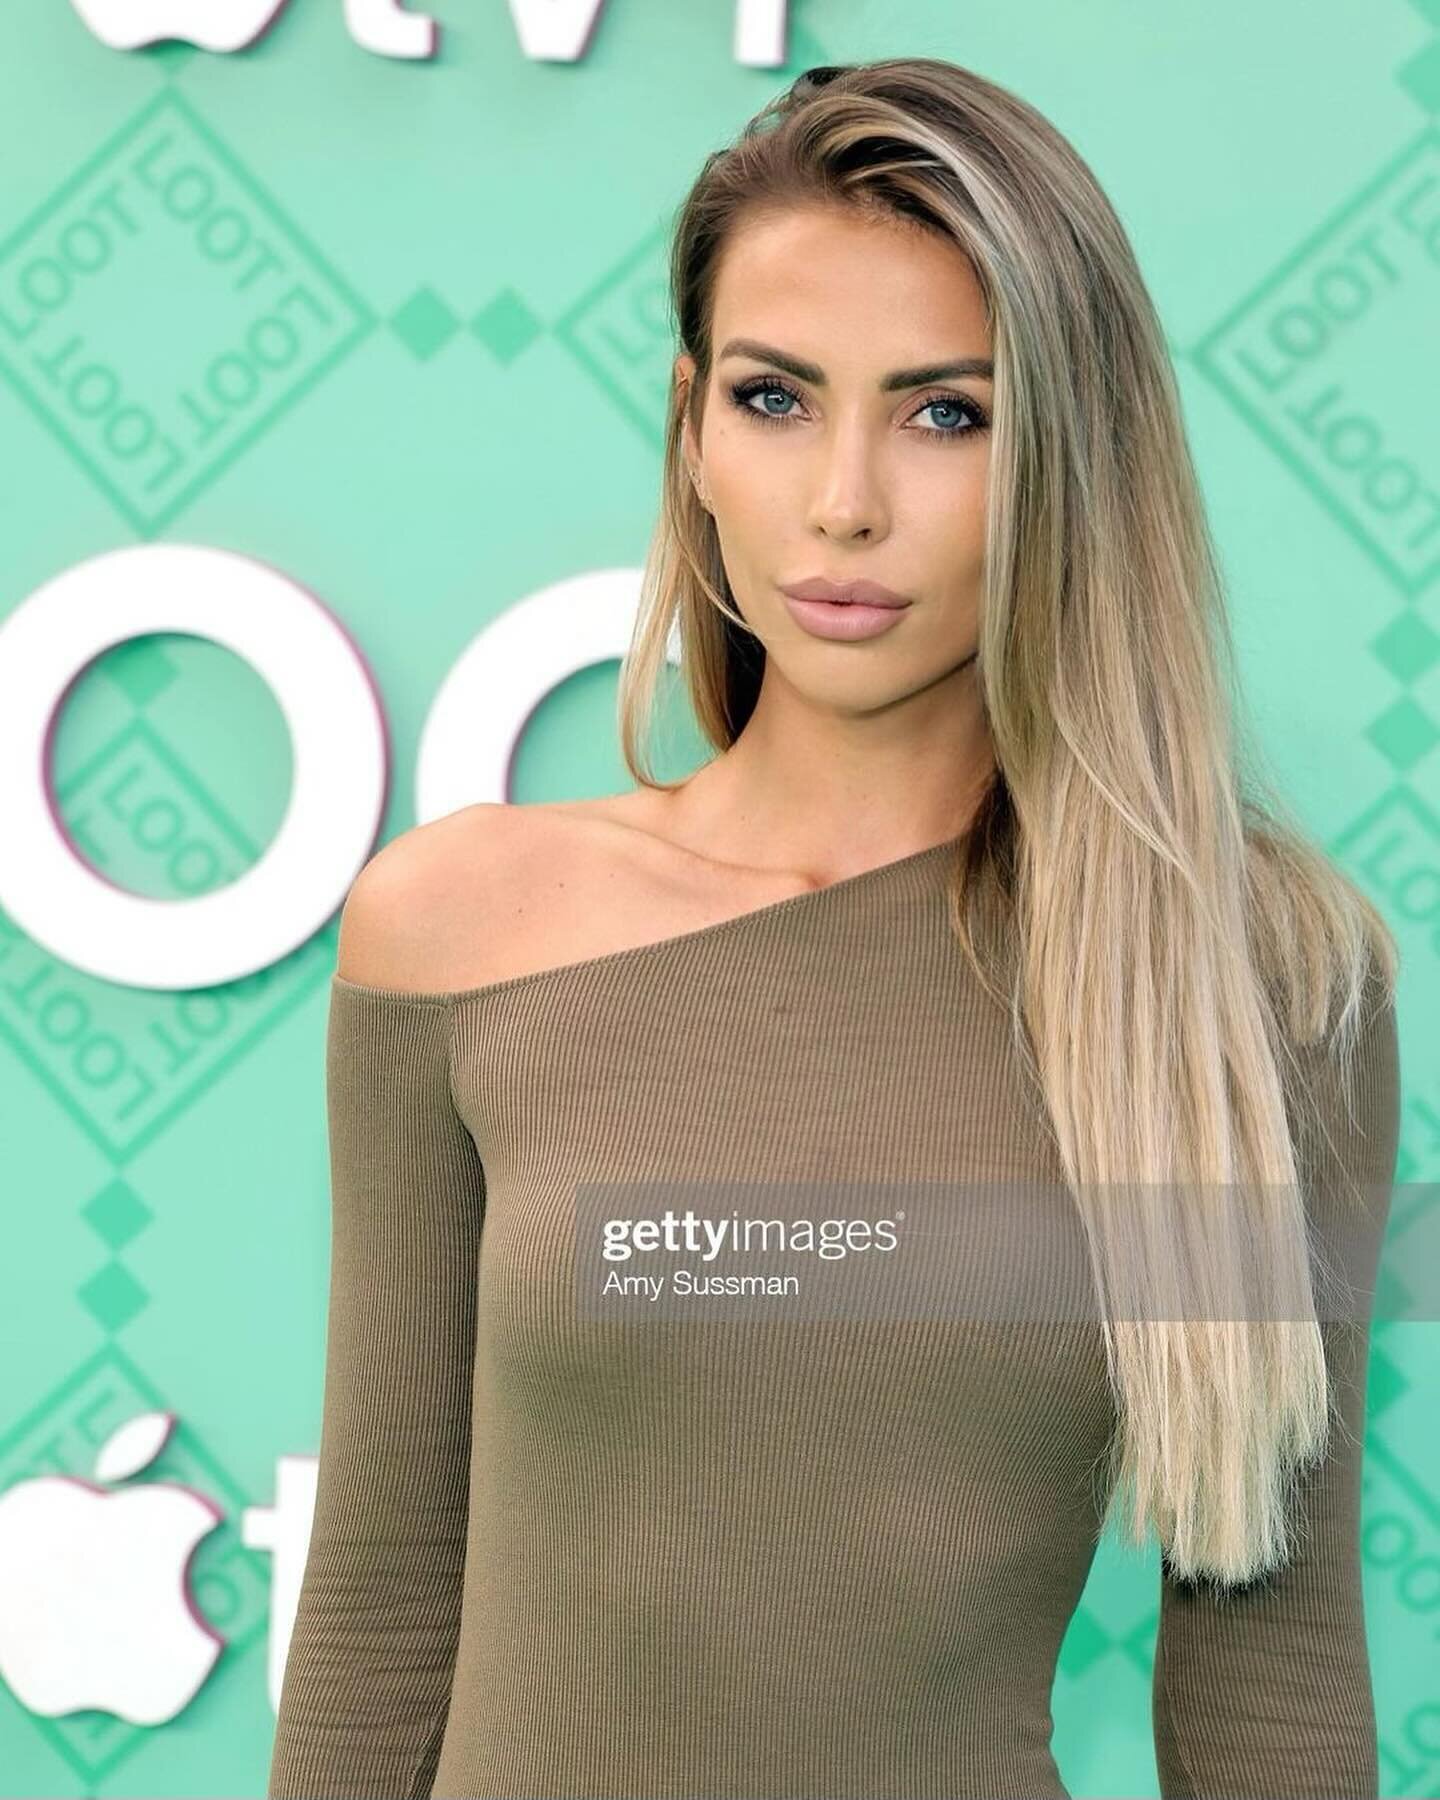 Throwback to model @dashaalexandria on the carpet for the premiere of #loot @appletv 💵